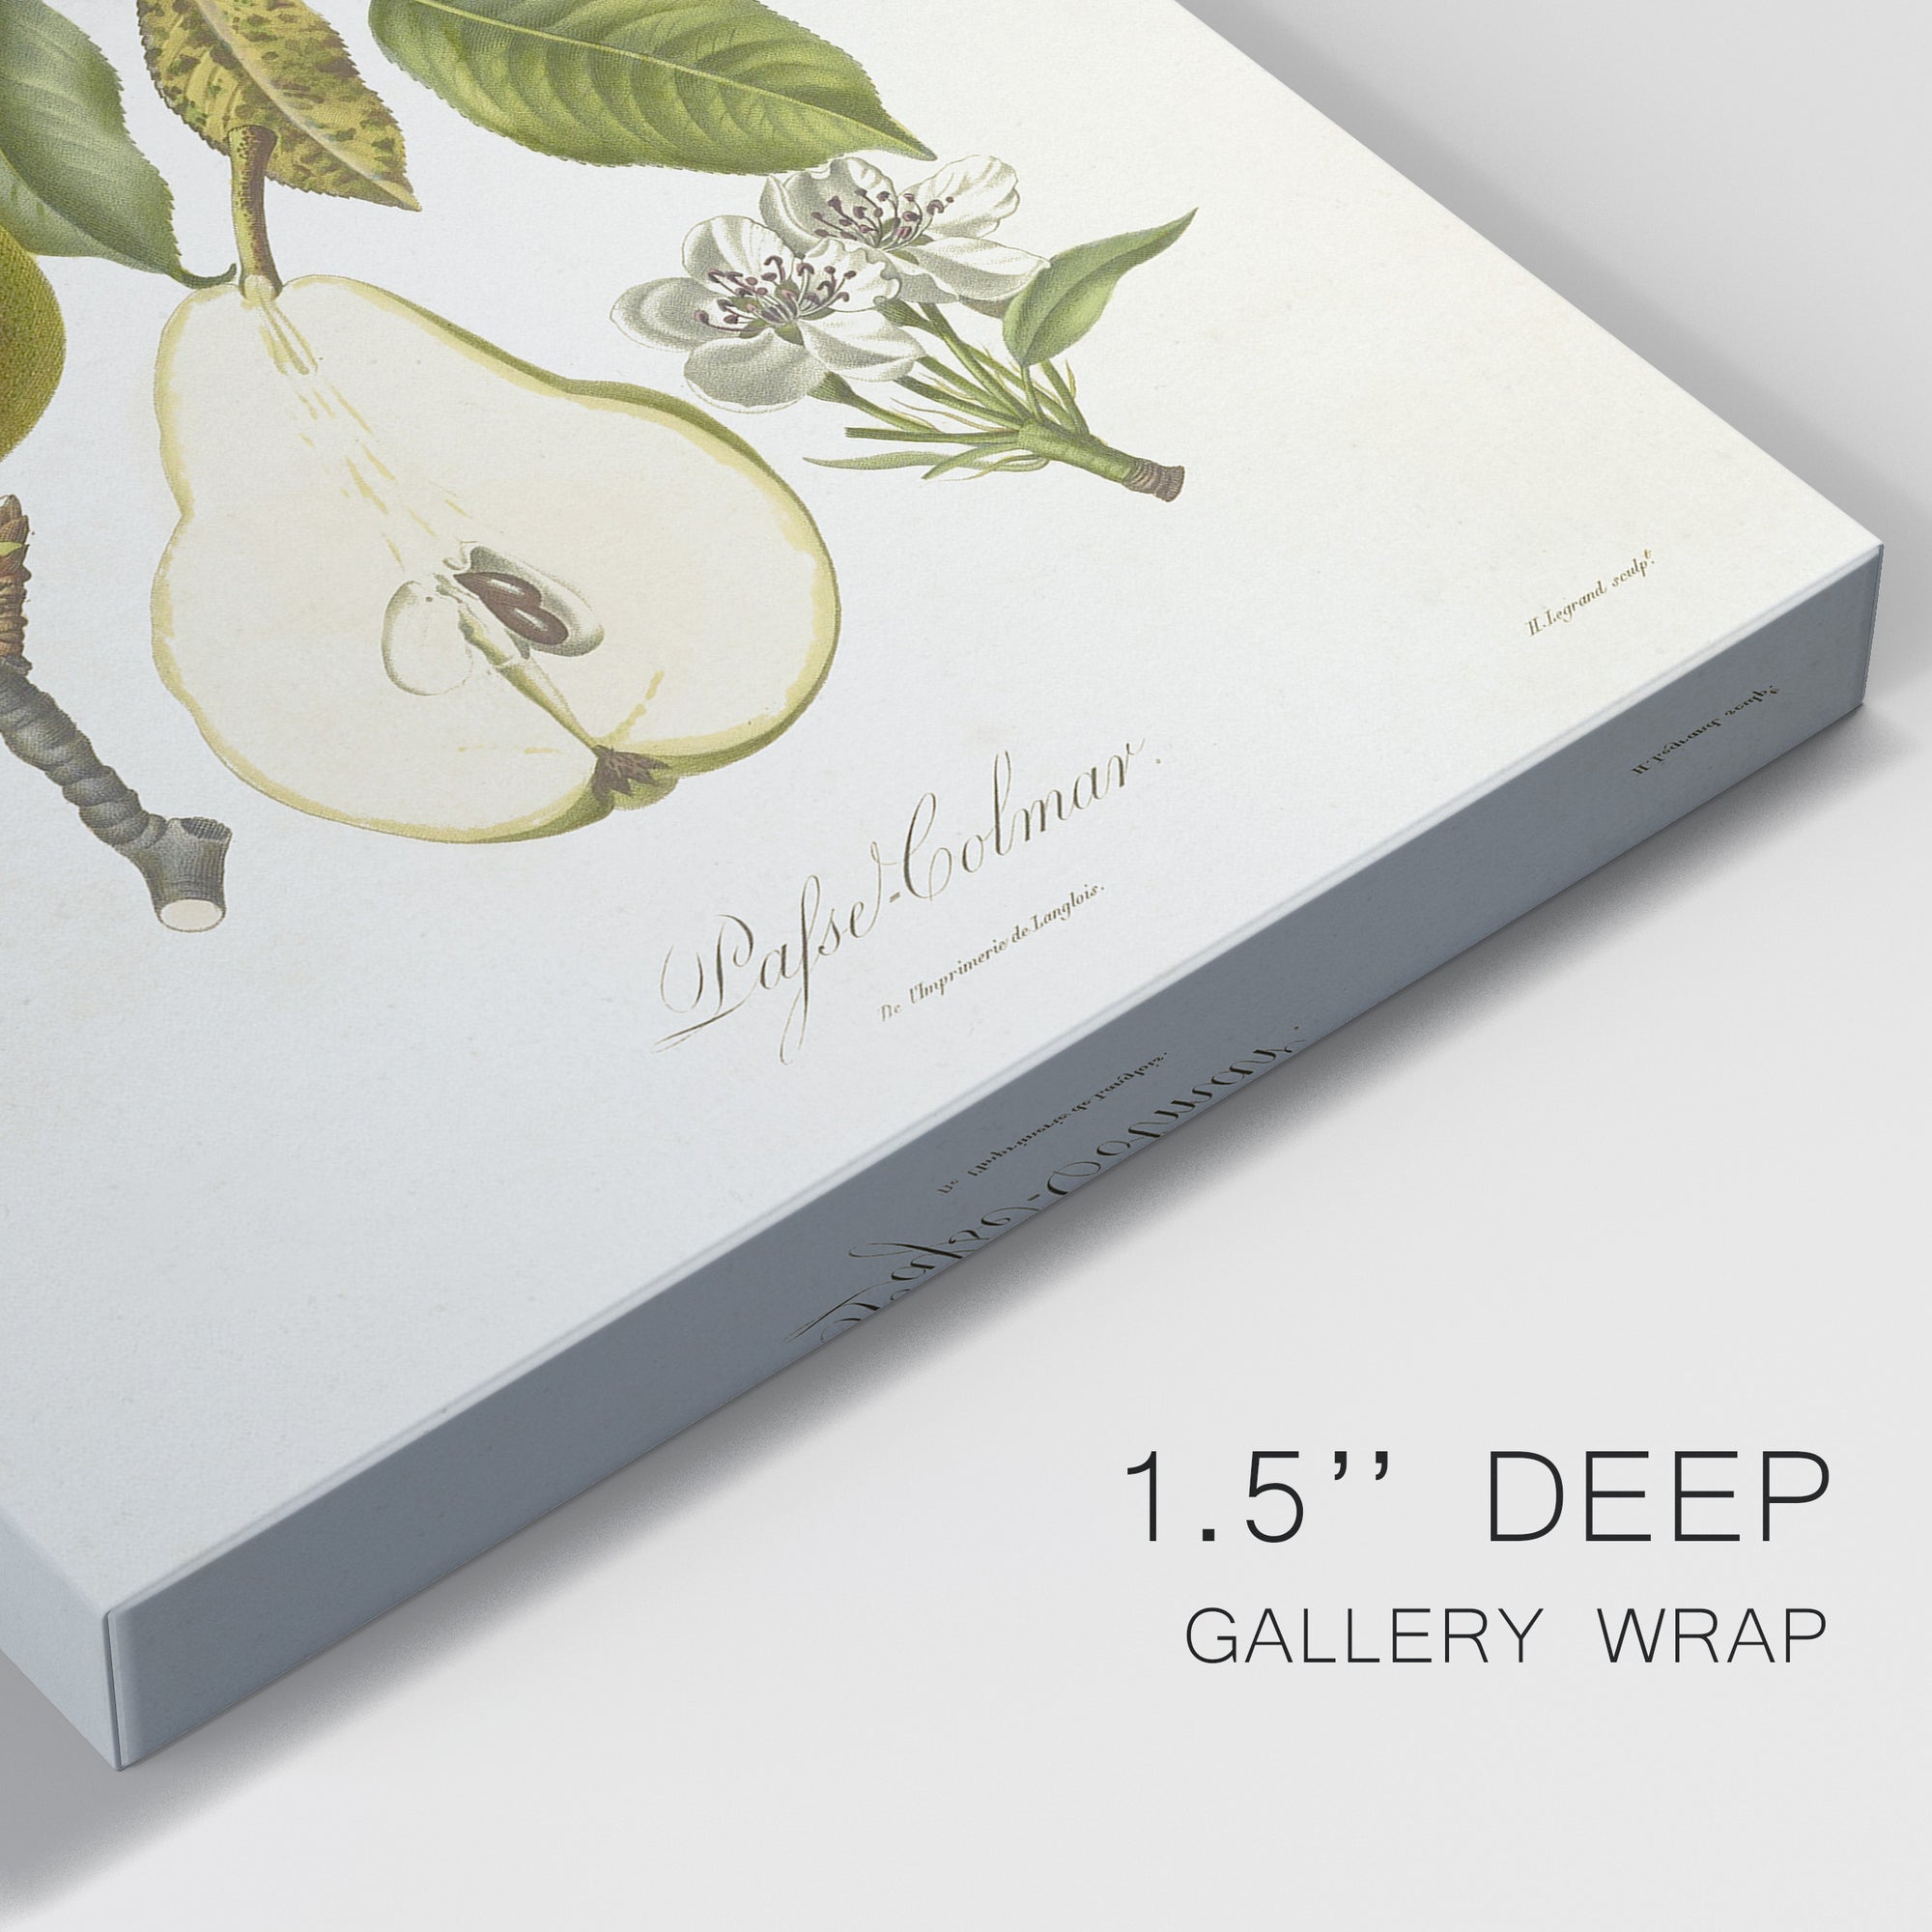 Vintage Pears II Premium Gallery Wrapped Canvas - Ready to Hang